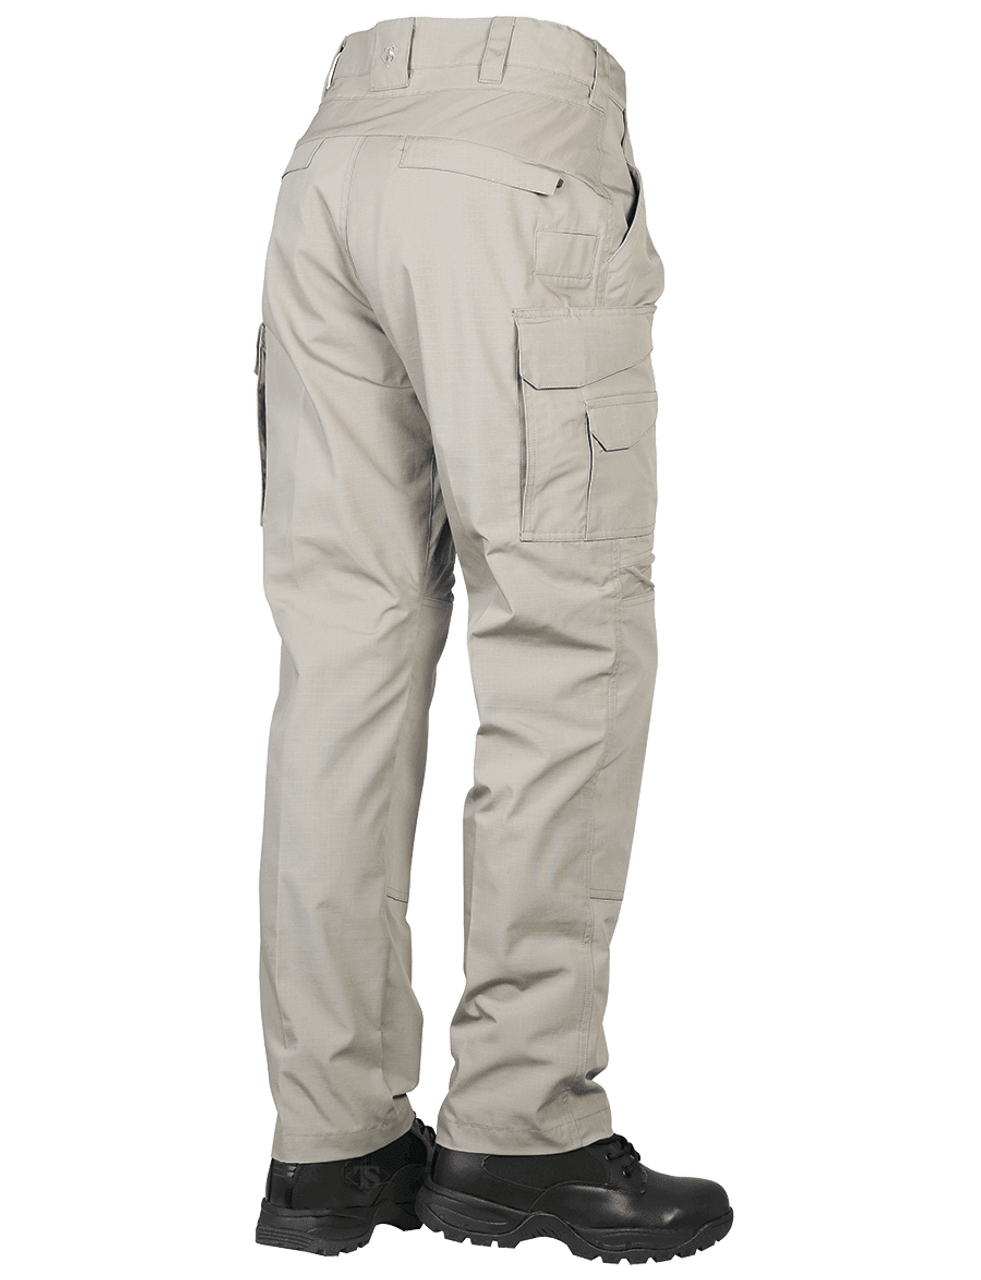 Tru-Spec TS-1483 Men's Pro Flex Pants, Uniform or Casual use, Polyester/Cotton, Comfort fit slider waistband, Relaxed fit, Low profile, with Color option